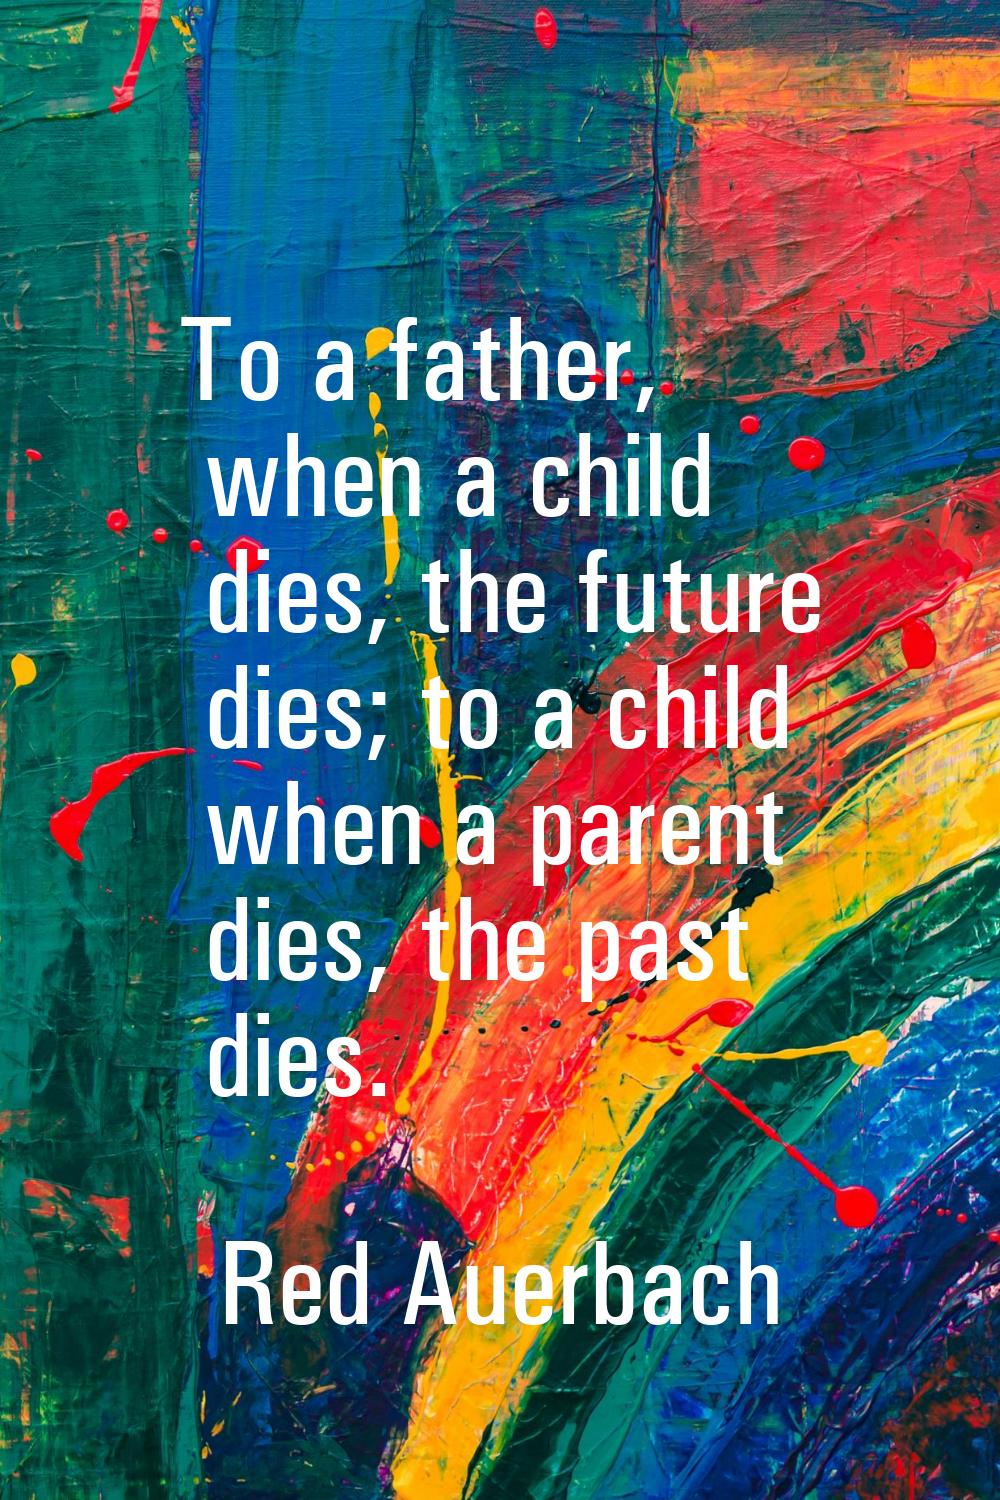 To a father, when a child dies, the future dies; to a child when a parent dies, the past dies.